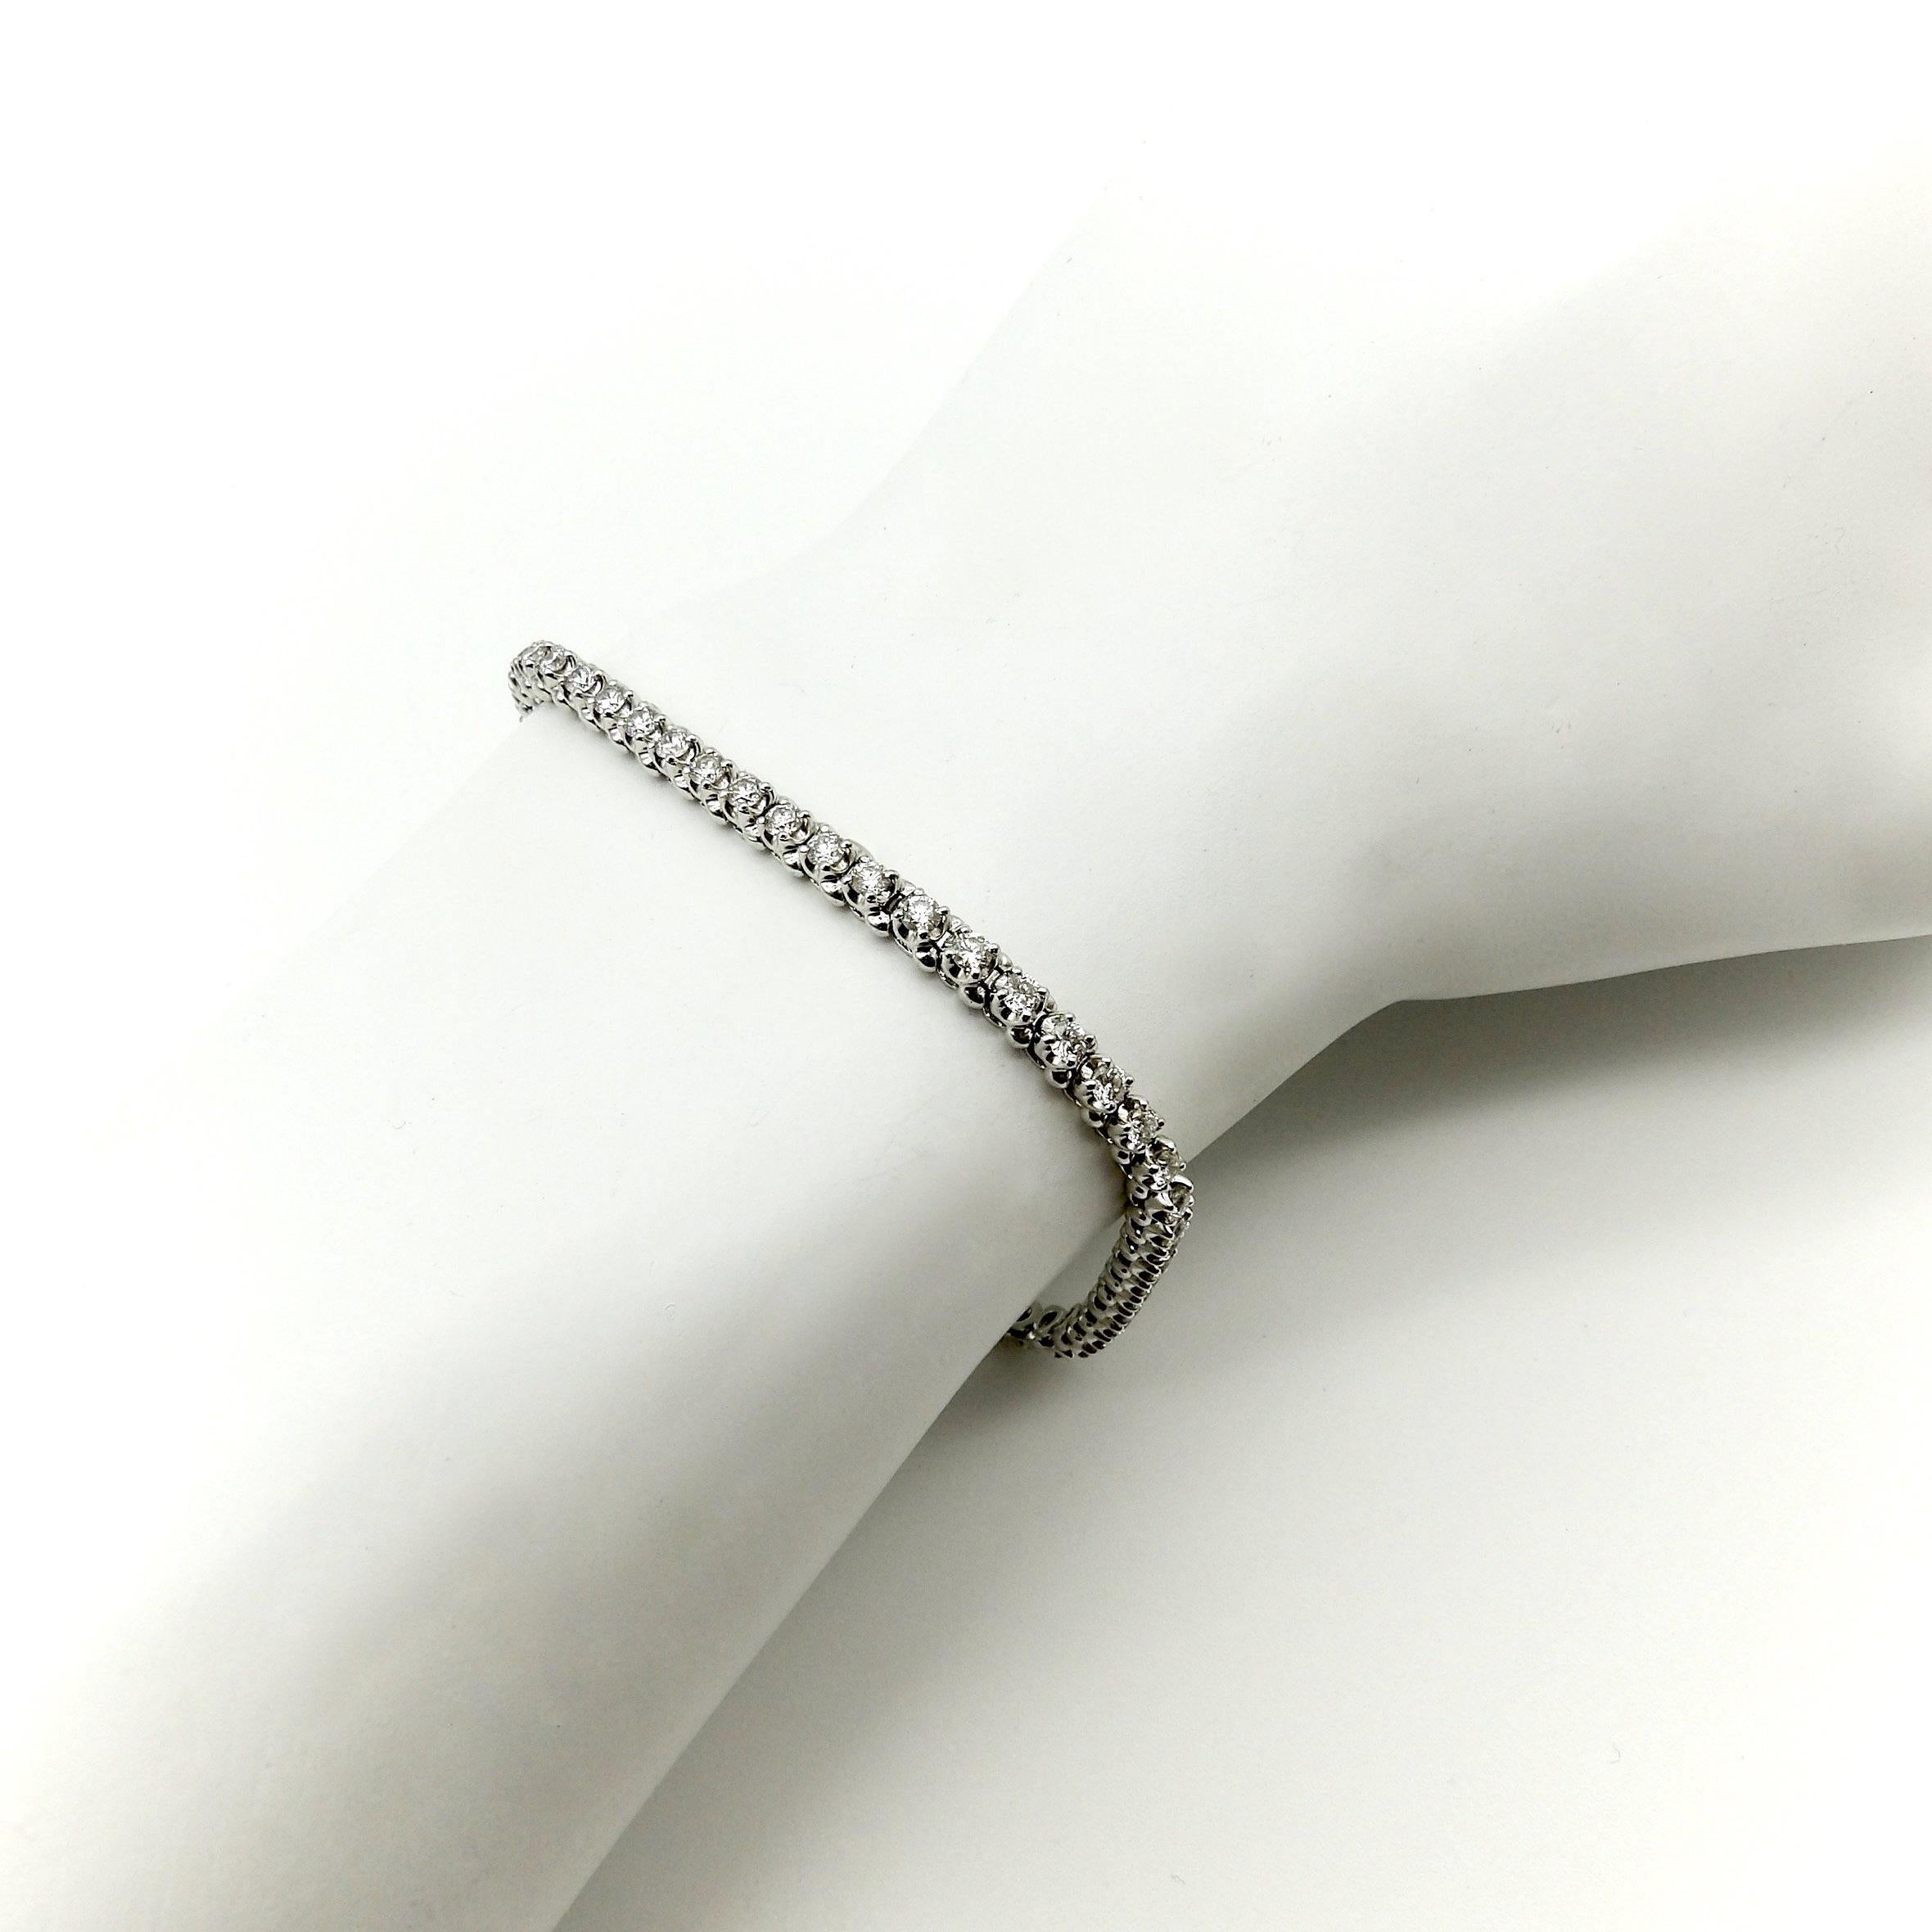 This 14k white gold tennis bracelet features 54 gorgeous round brilliant-cut diamonds. The tennis bracelet, also referred to as a line bracelet, was a popular style in the Art Deco era—a classic look that’s been around for a long time and is always